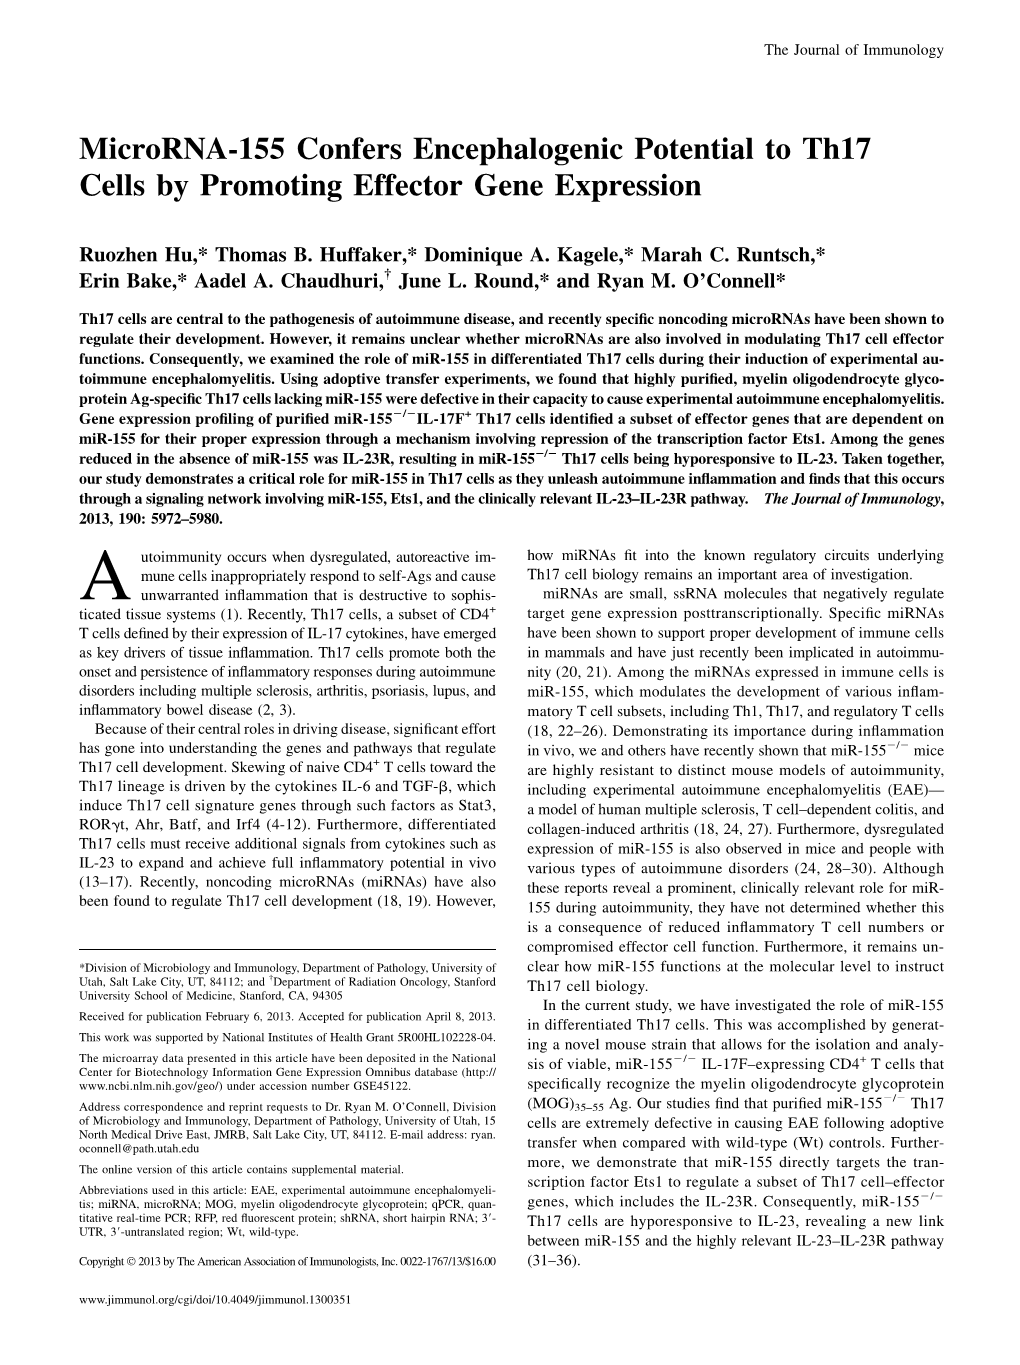 Effector Gene Expression Potential to Th17 Cells by Promoting Microrna